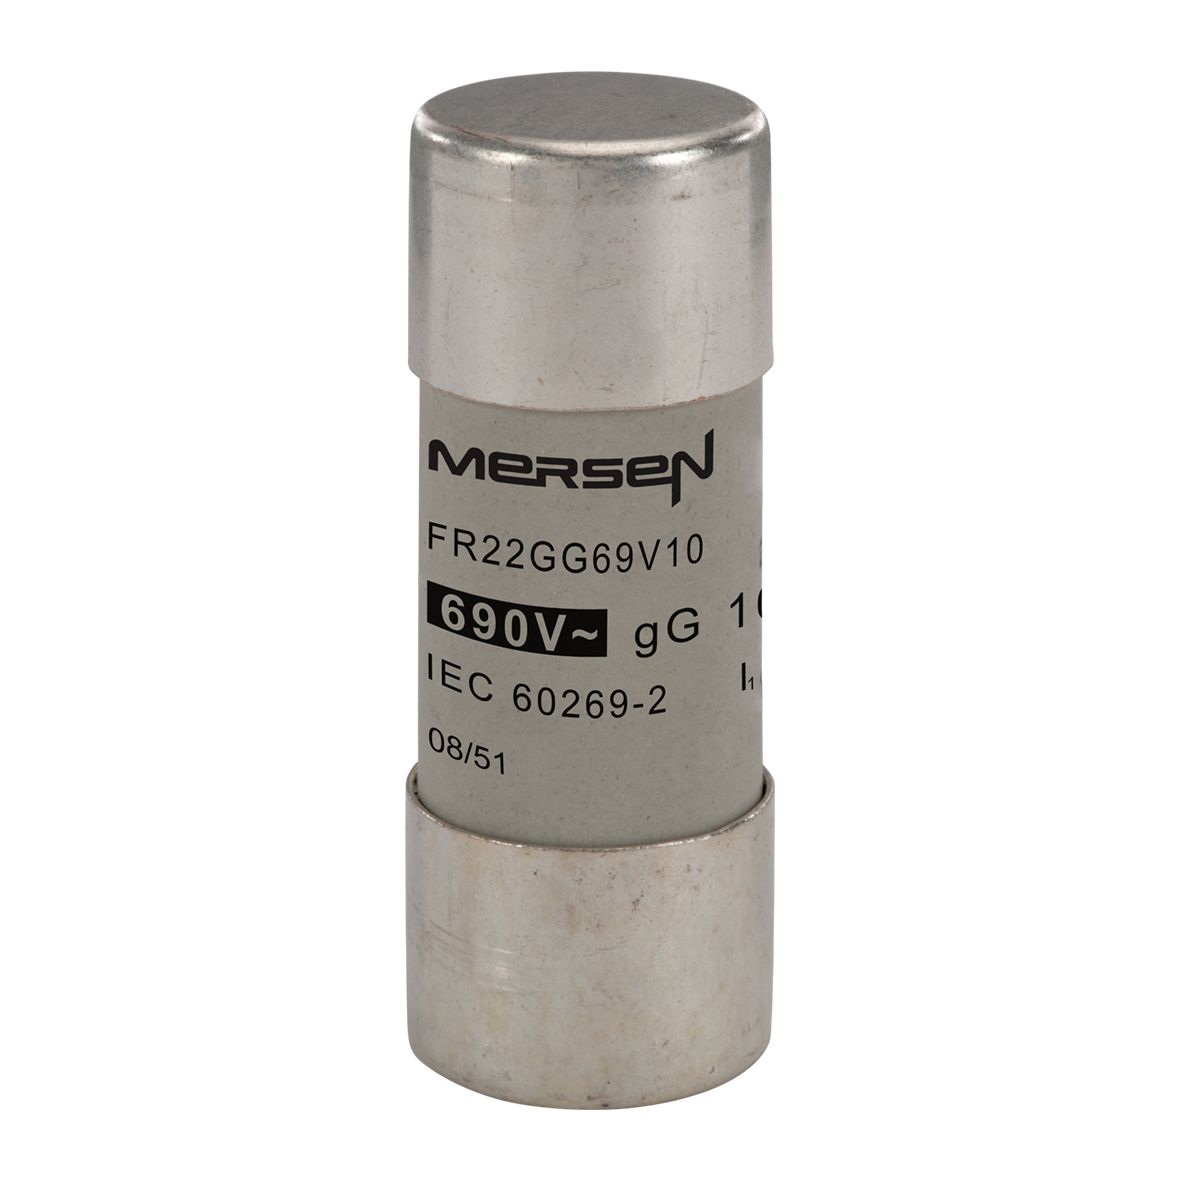 T200761 - Cylindrical fuse-link gG 690VAC 22.2x58, 10A